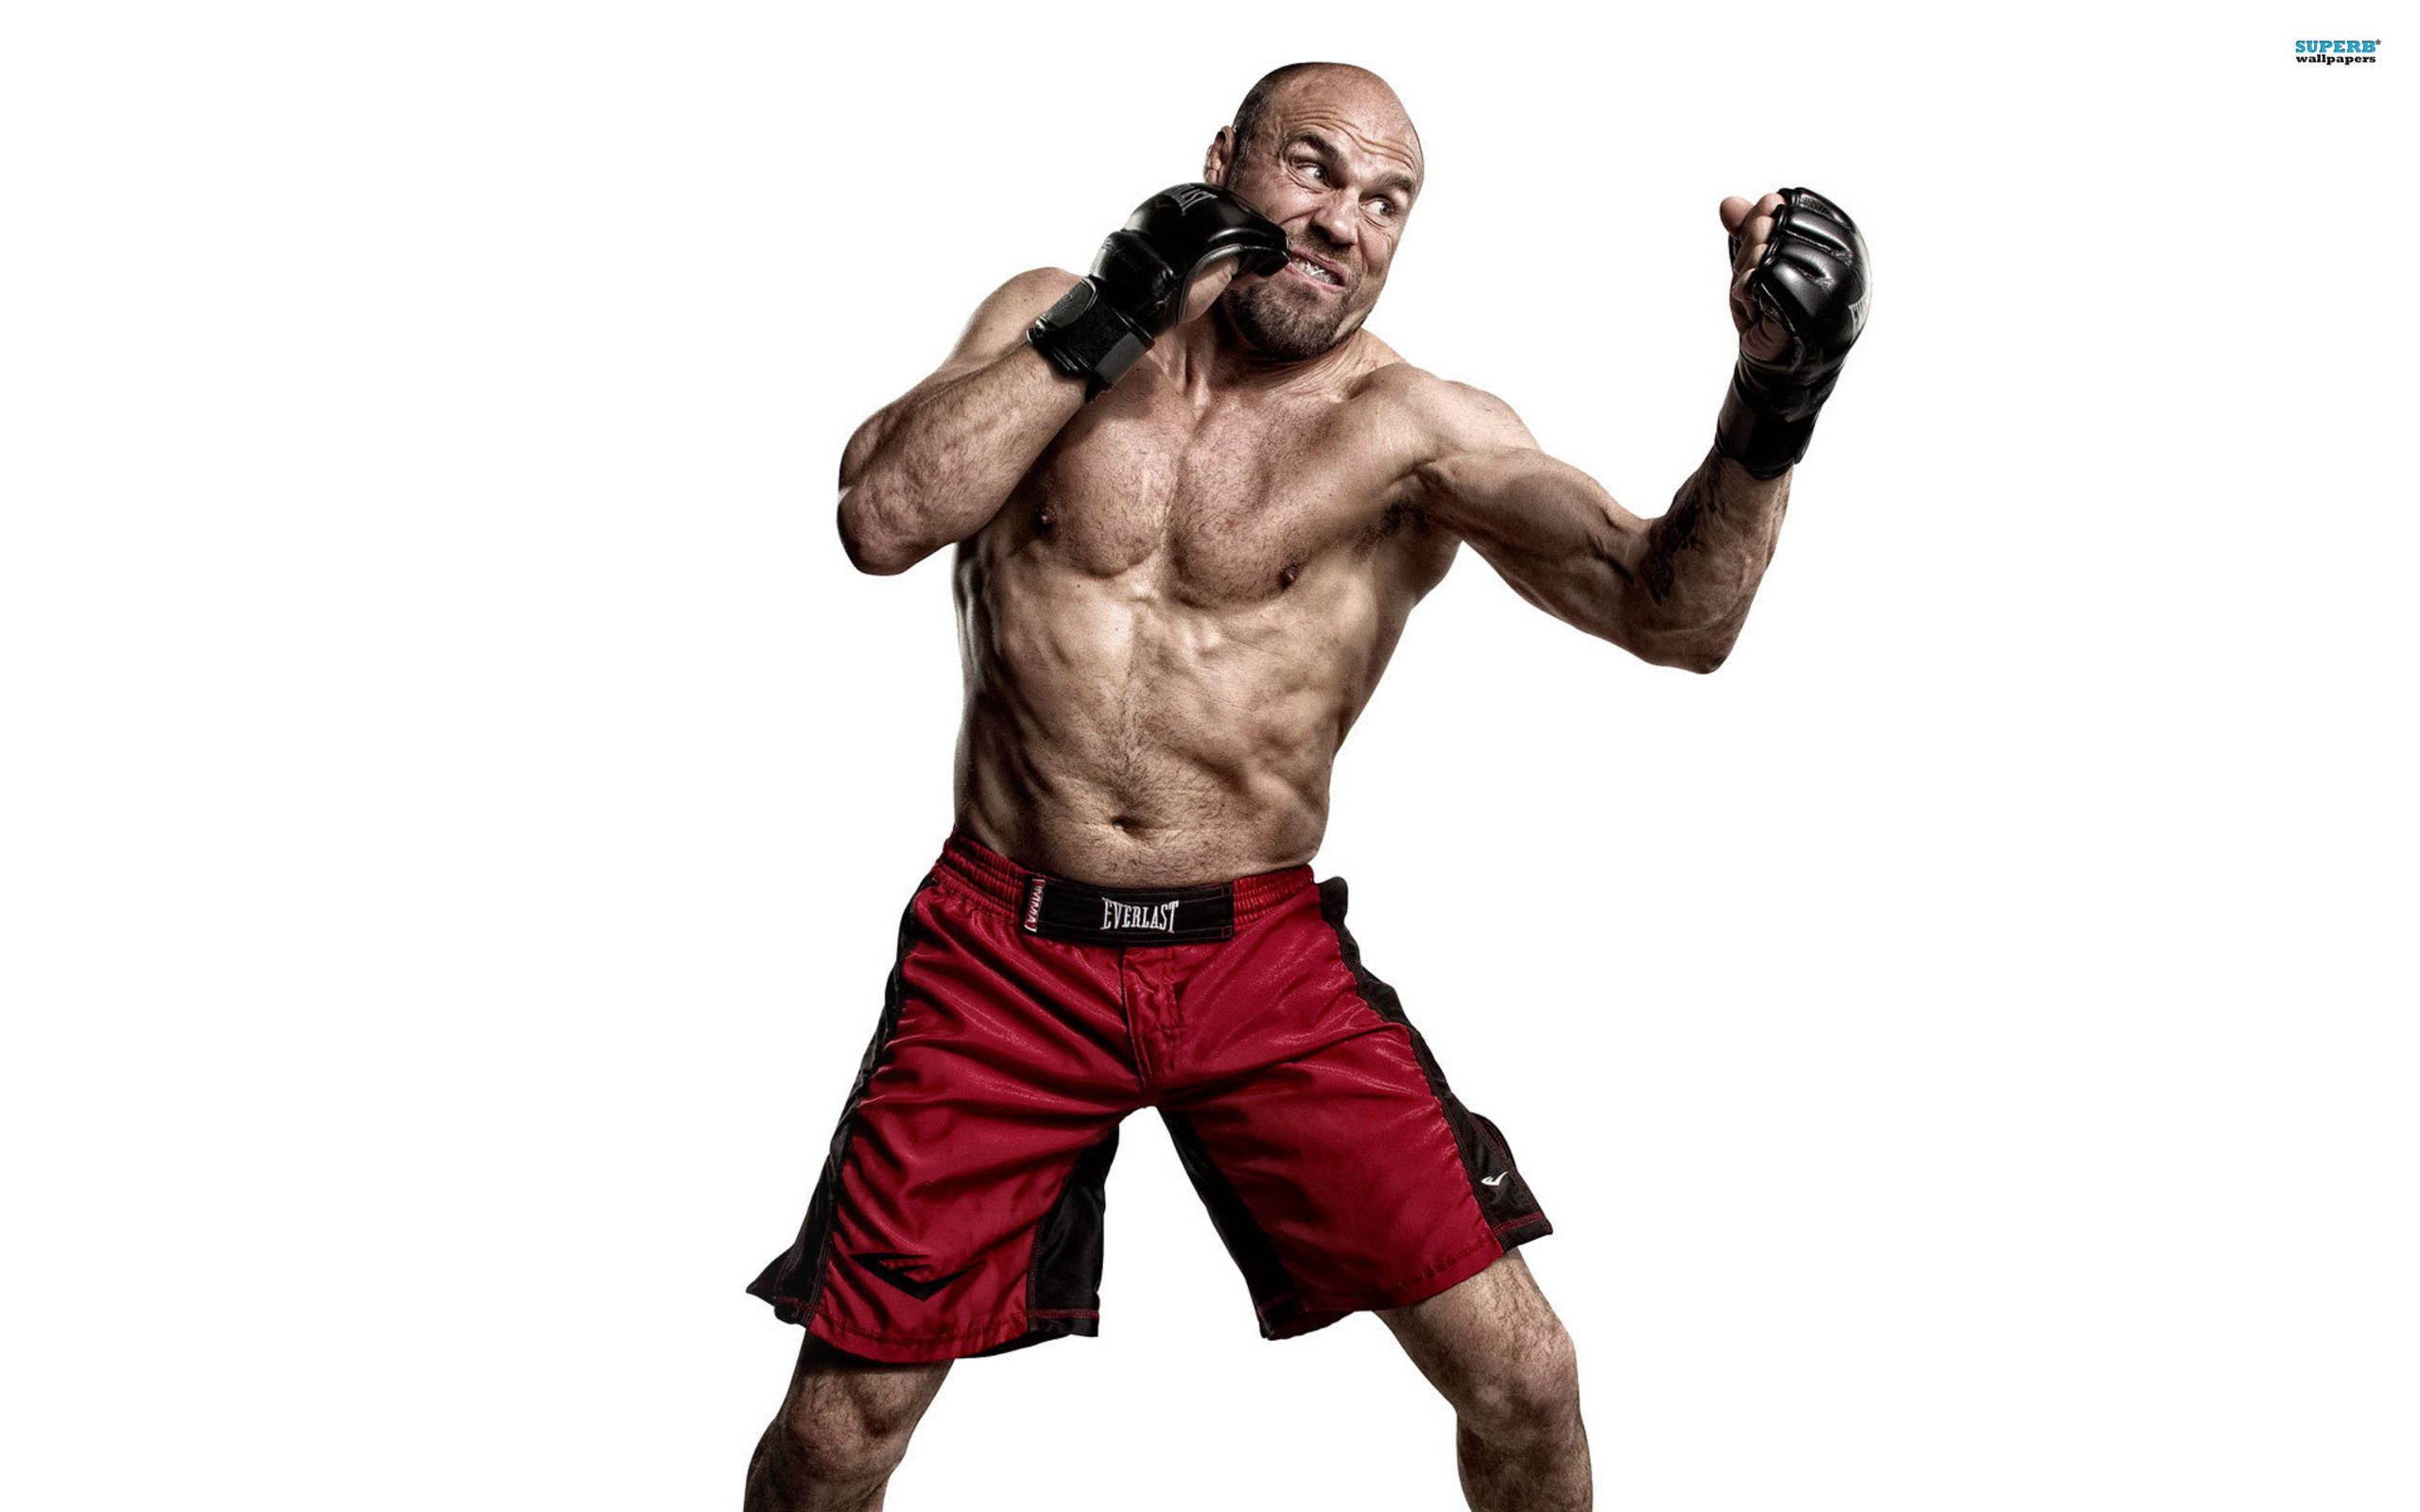 mma fighter couture, Fantasy football funny, Sports marketing ideas